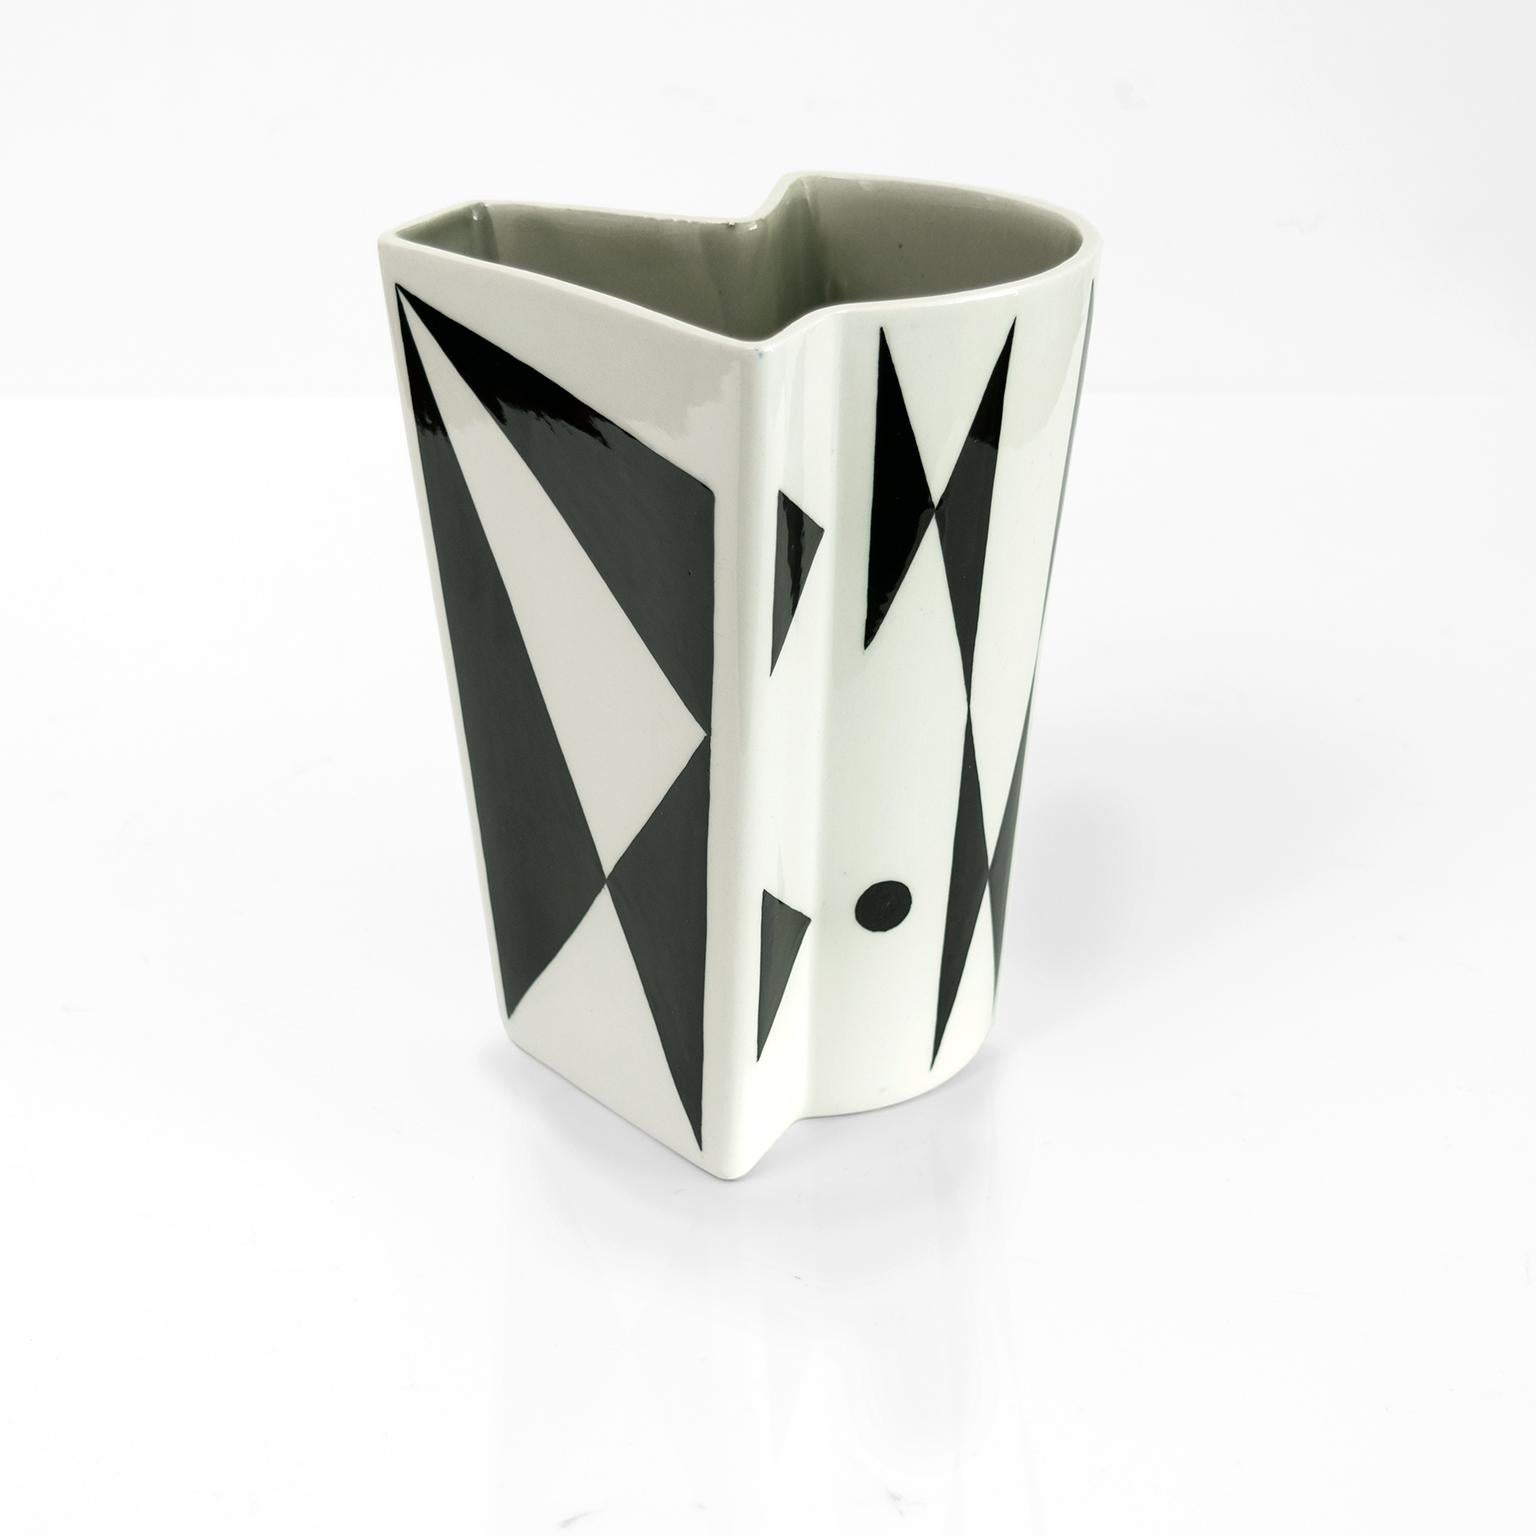 Carl-Harry Stalhane Geometric Bowl and Vase, Rorstrand, Sweden 1950 For Sale 2